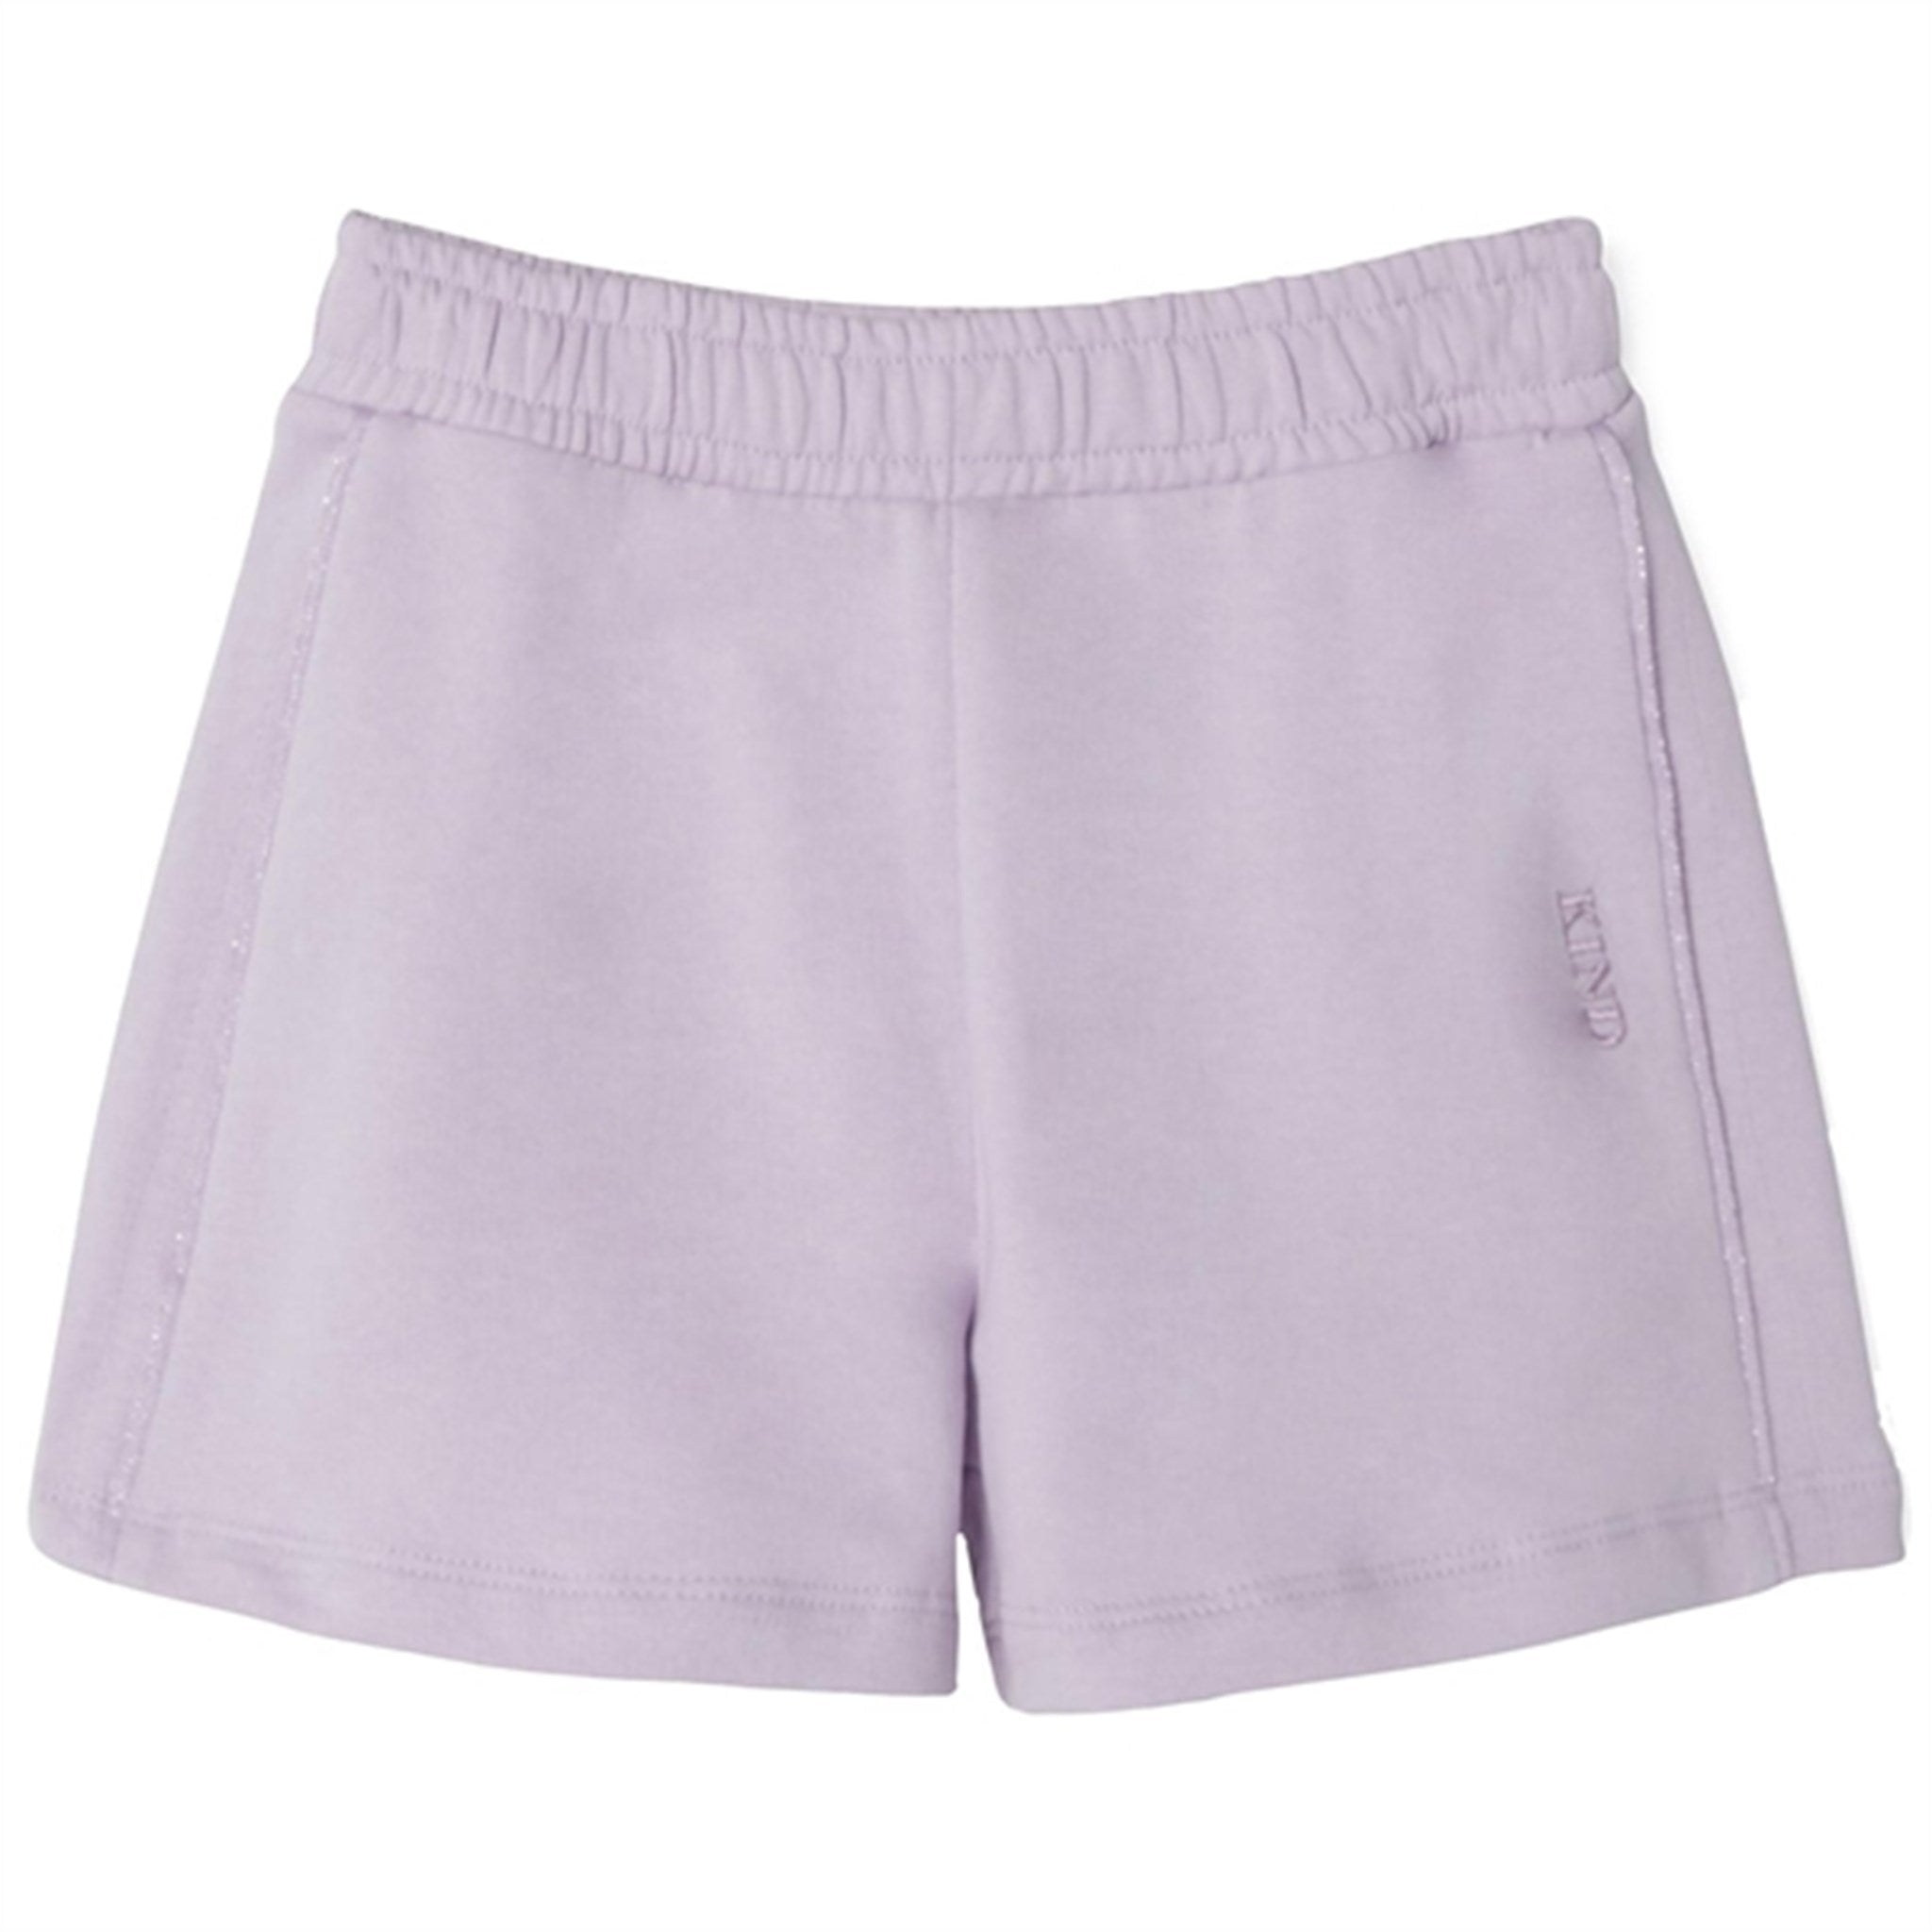 Name it Orchid Bloom Hikarla Sweat Shorts